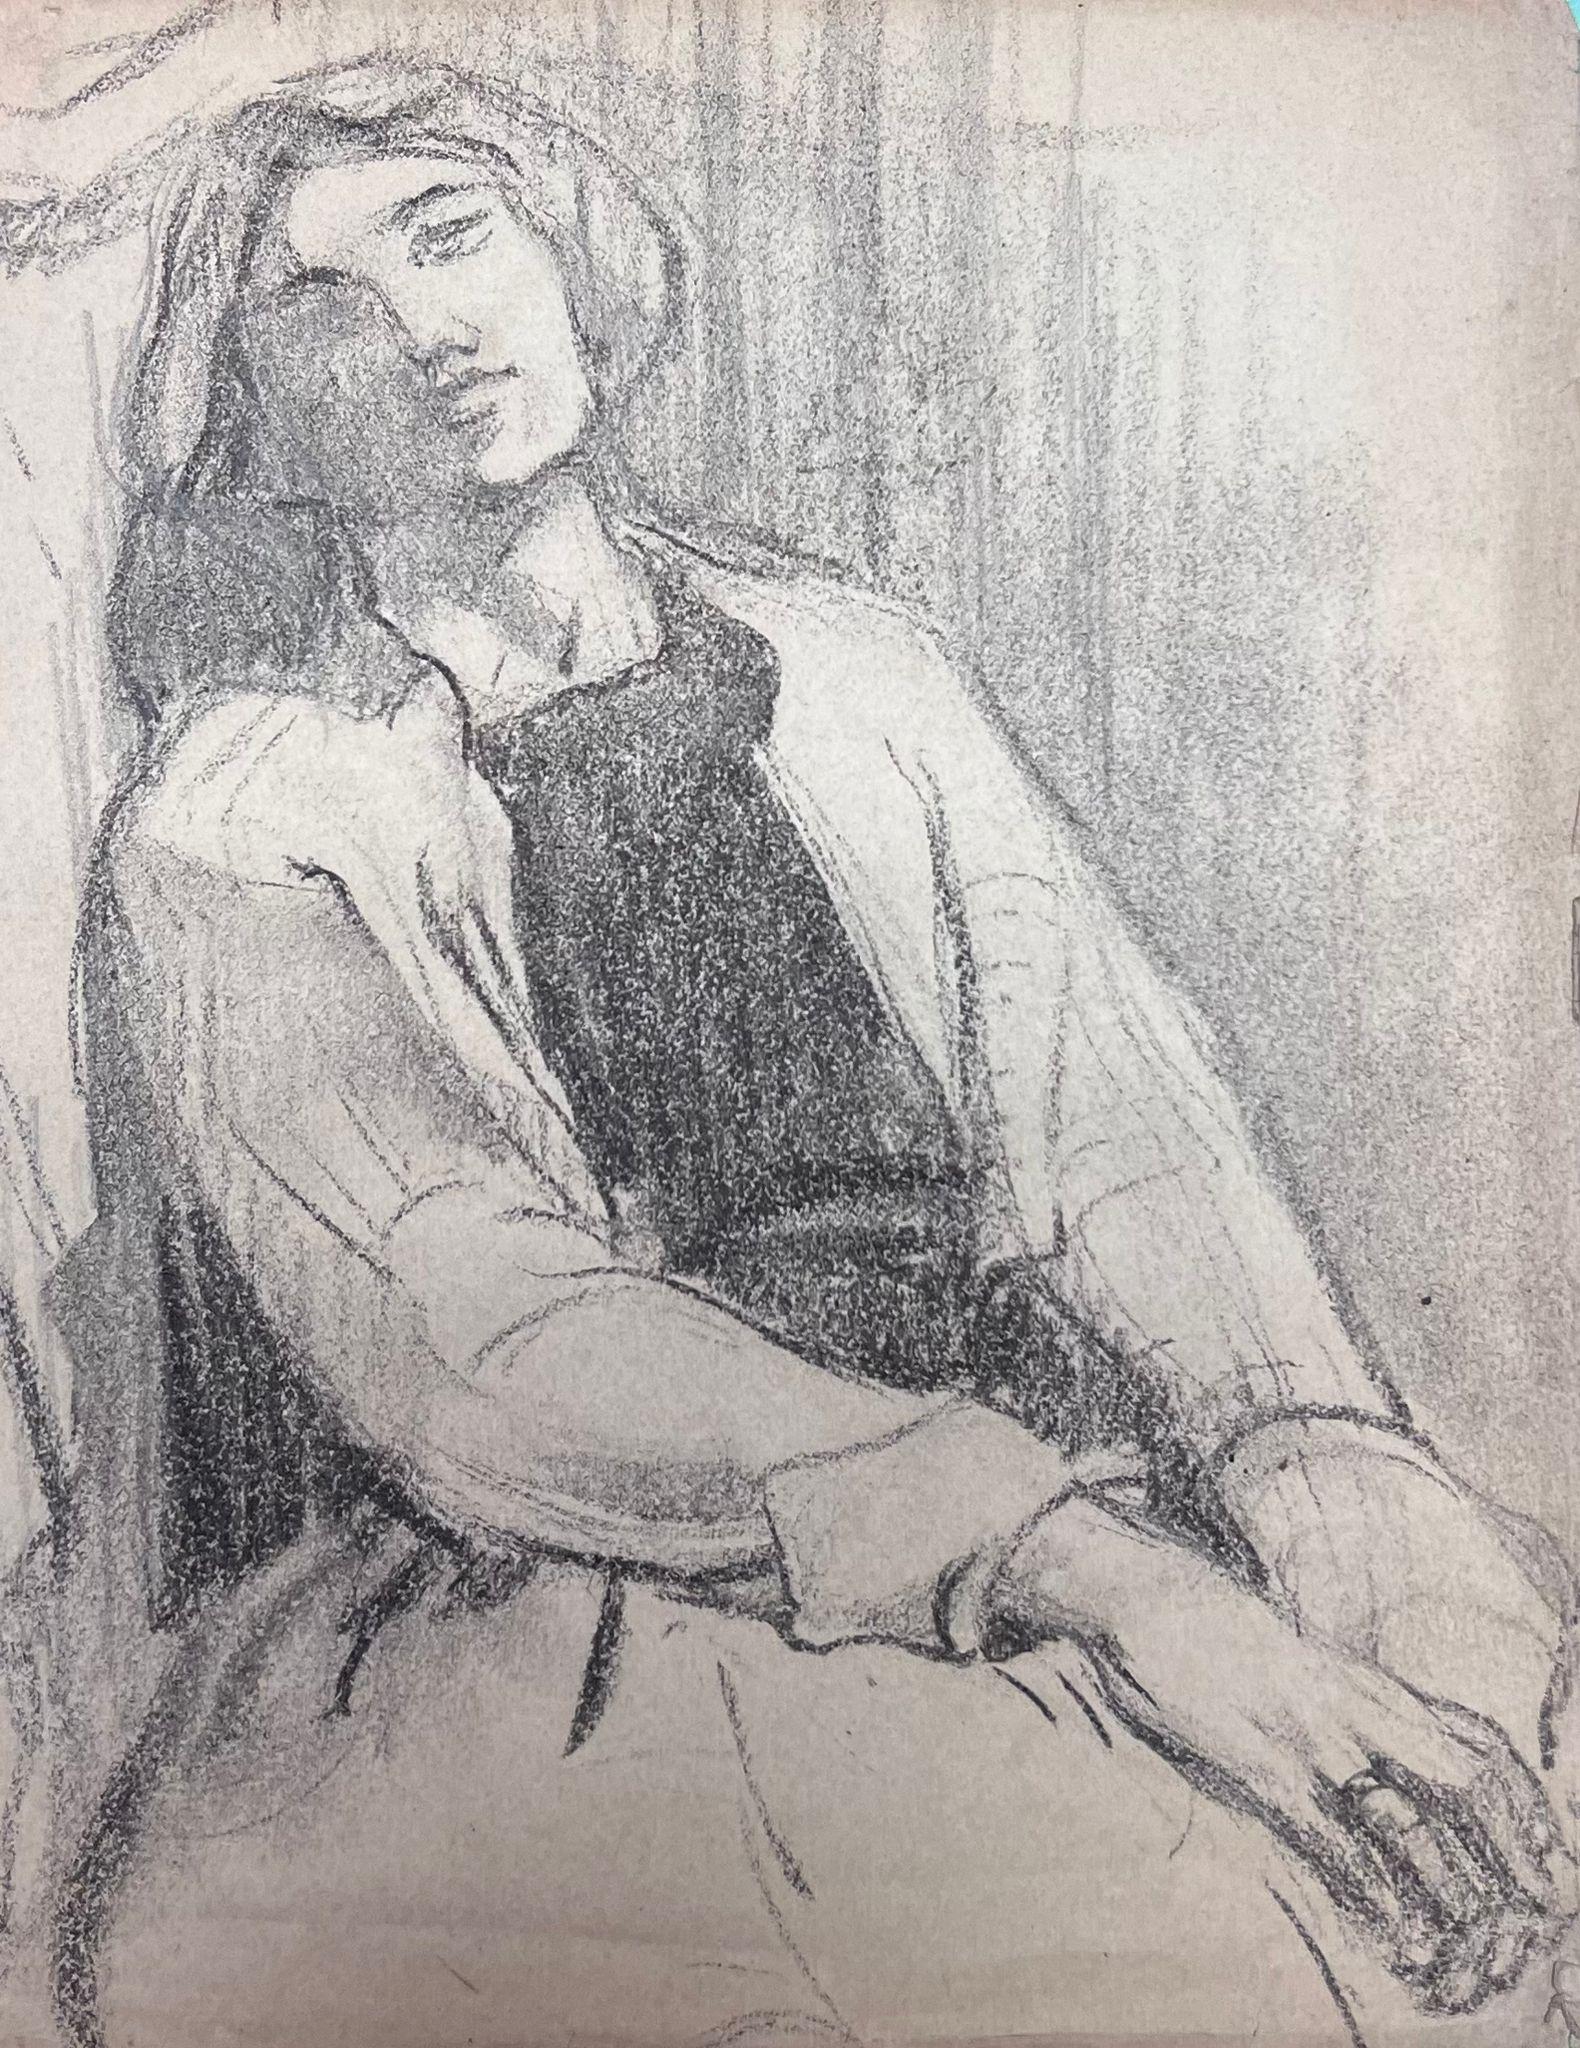 Female Portrait
by Louise Alix (French, 1888-1980) *see notes below
provenance stamp to the back 
black pastel drawing on artist paper, unframed
measures: 10 high by 8 inches wide
condition: overall very good and sound, a few scuffs and marks to the